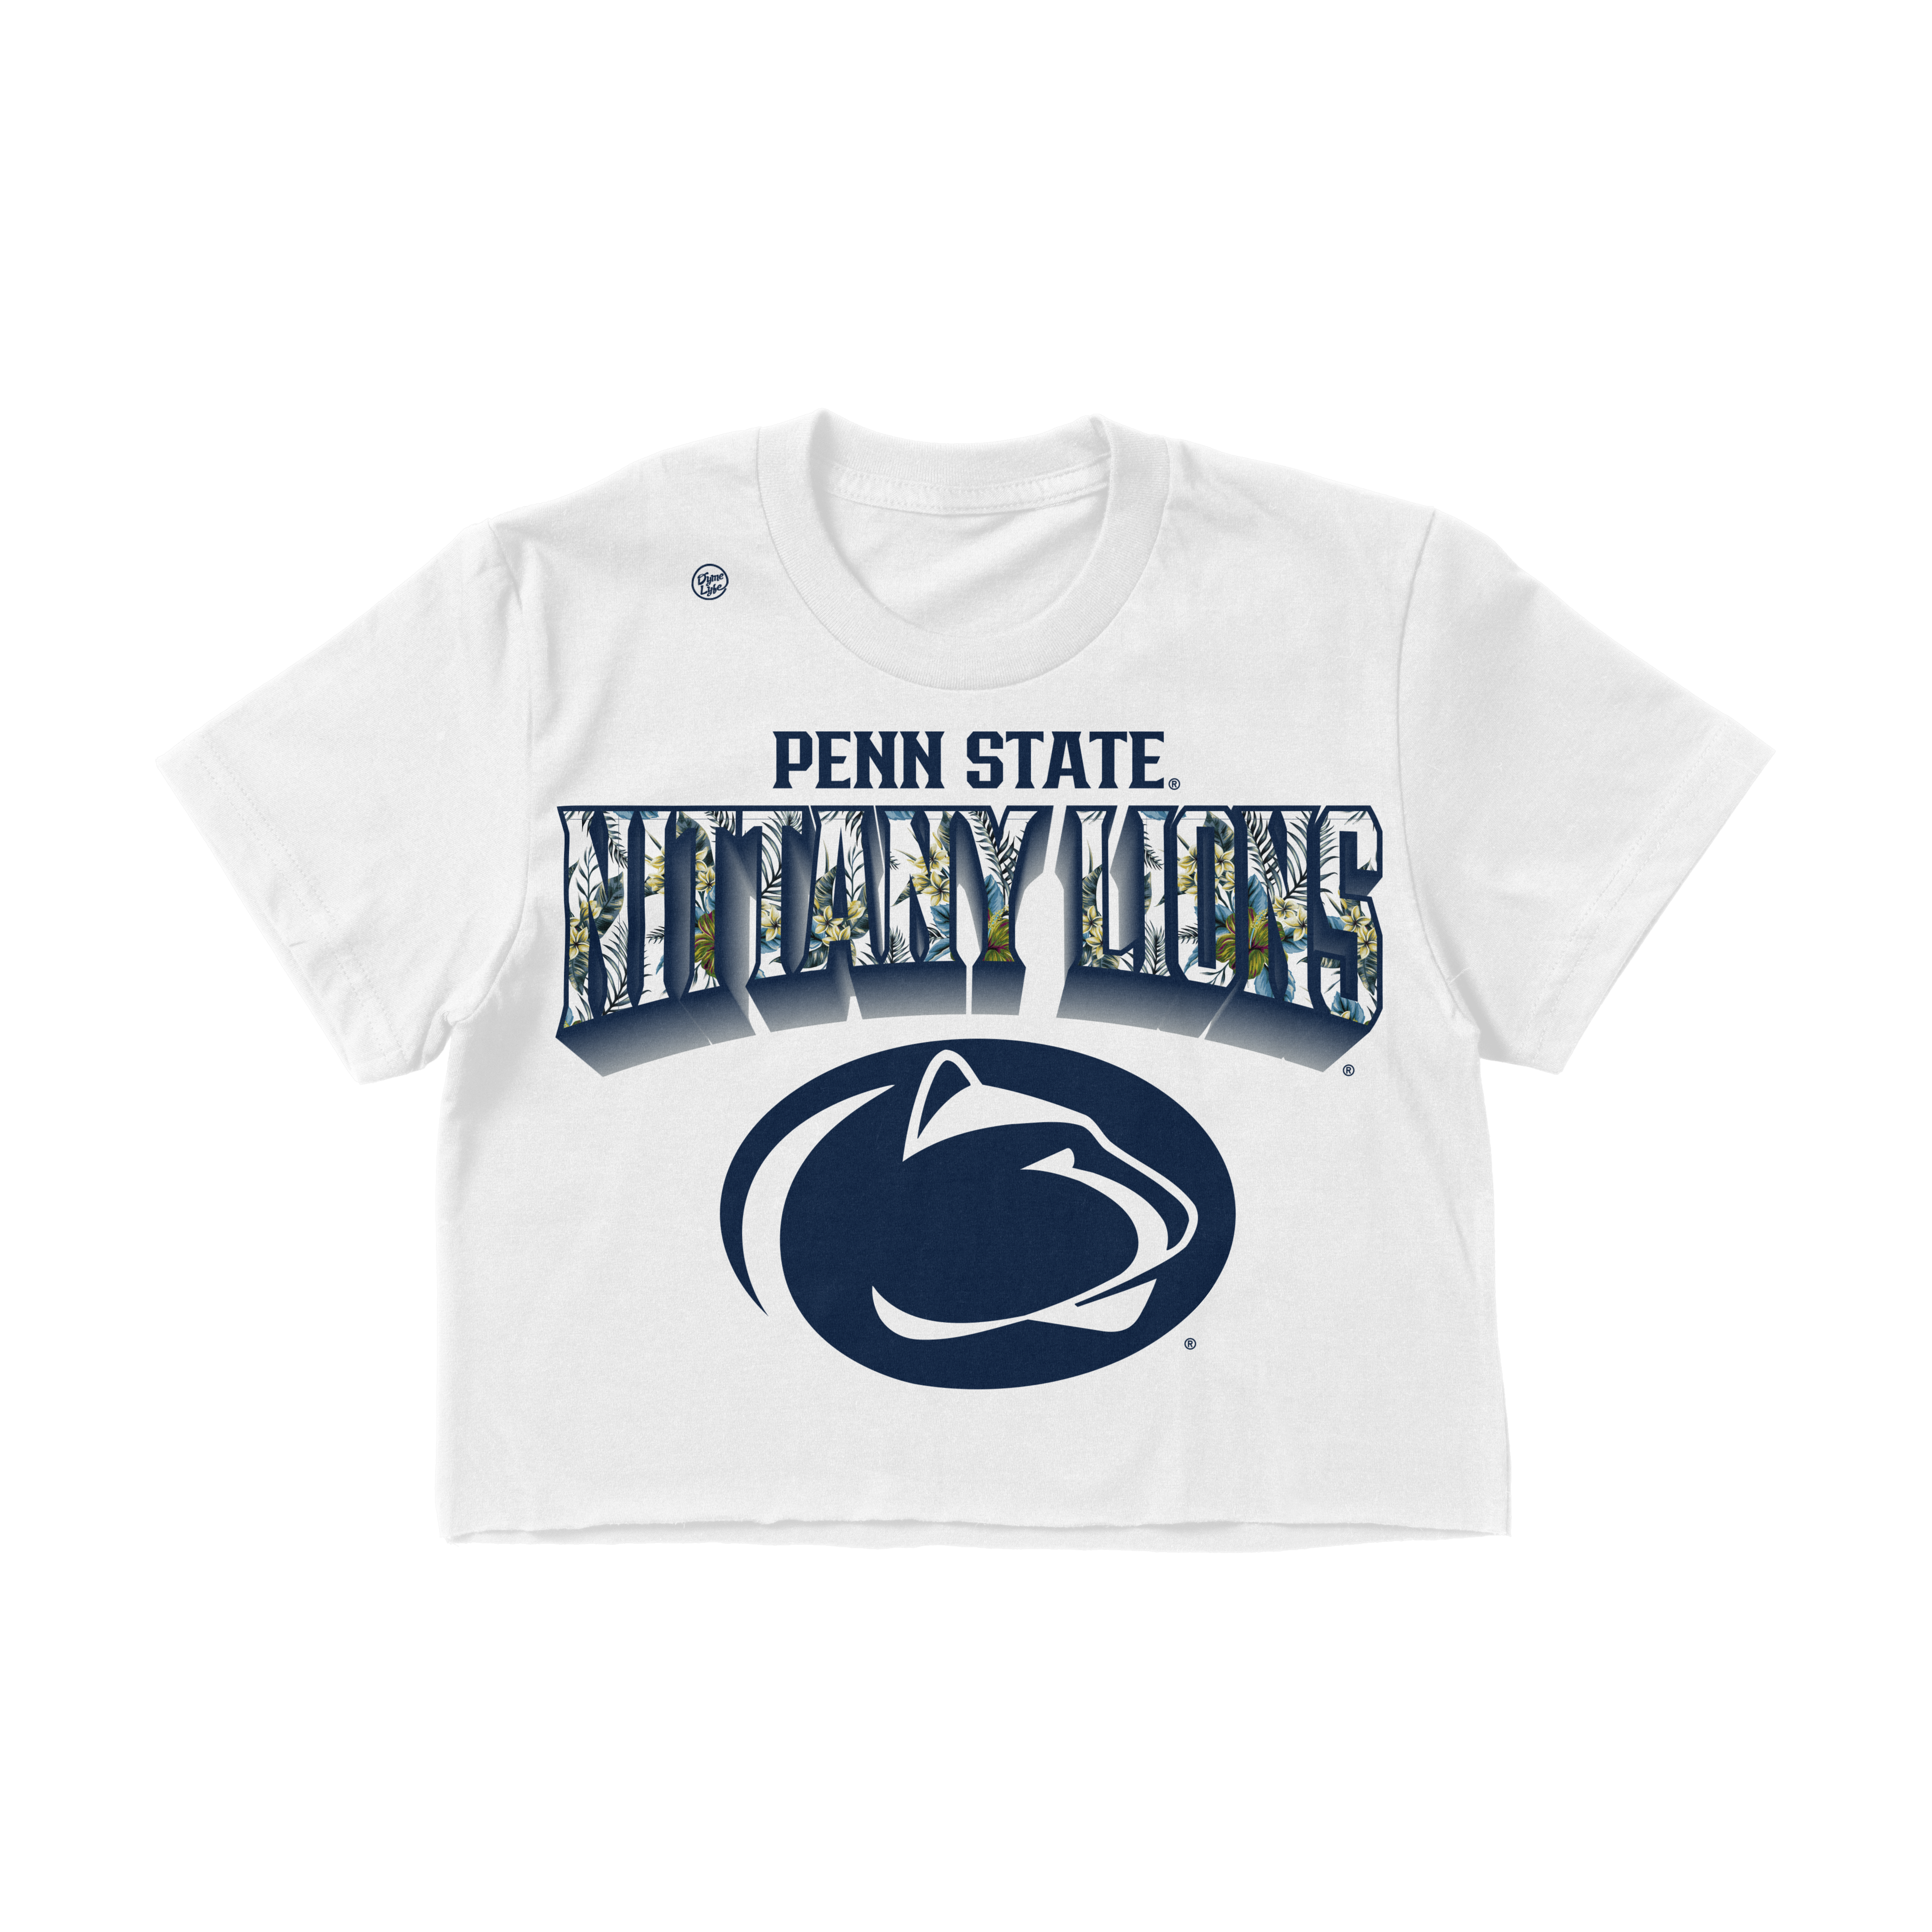 Penn State Nittany Lions Women’s Floral Crop Top